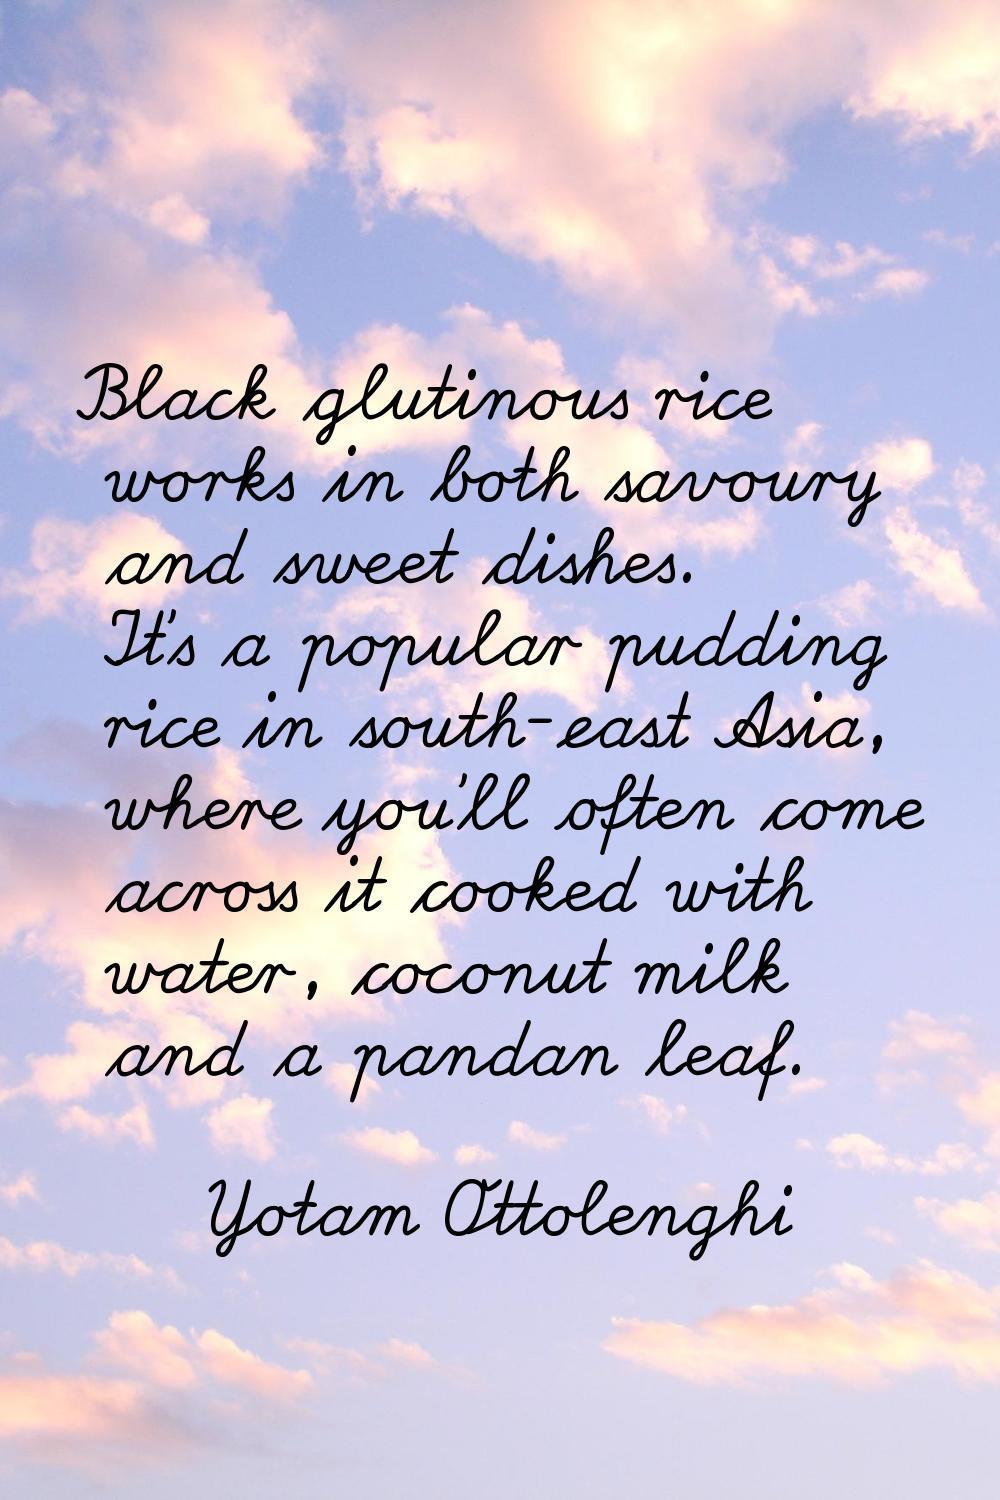 Black glutinous rice works in both savoury and sweet dishes. It's a popular pudding rice in south-e